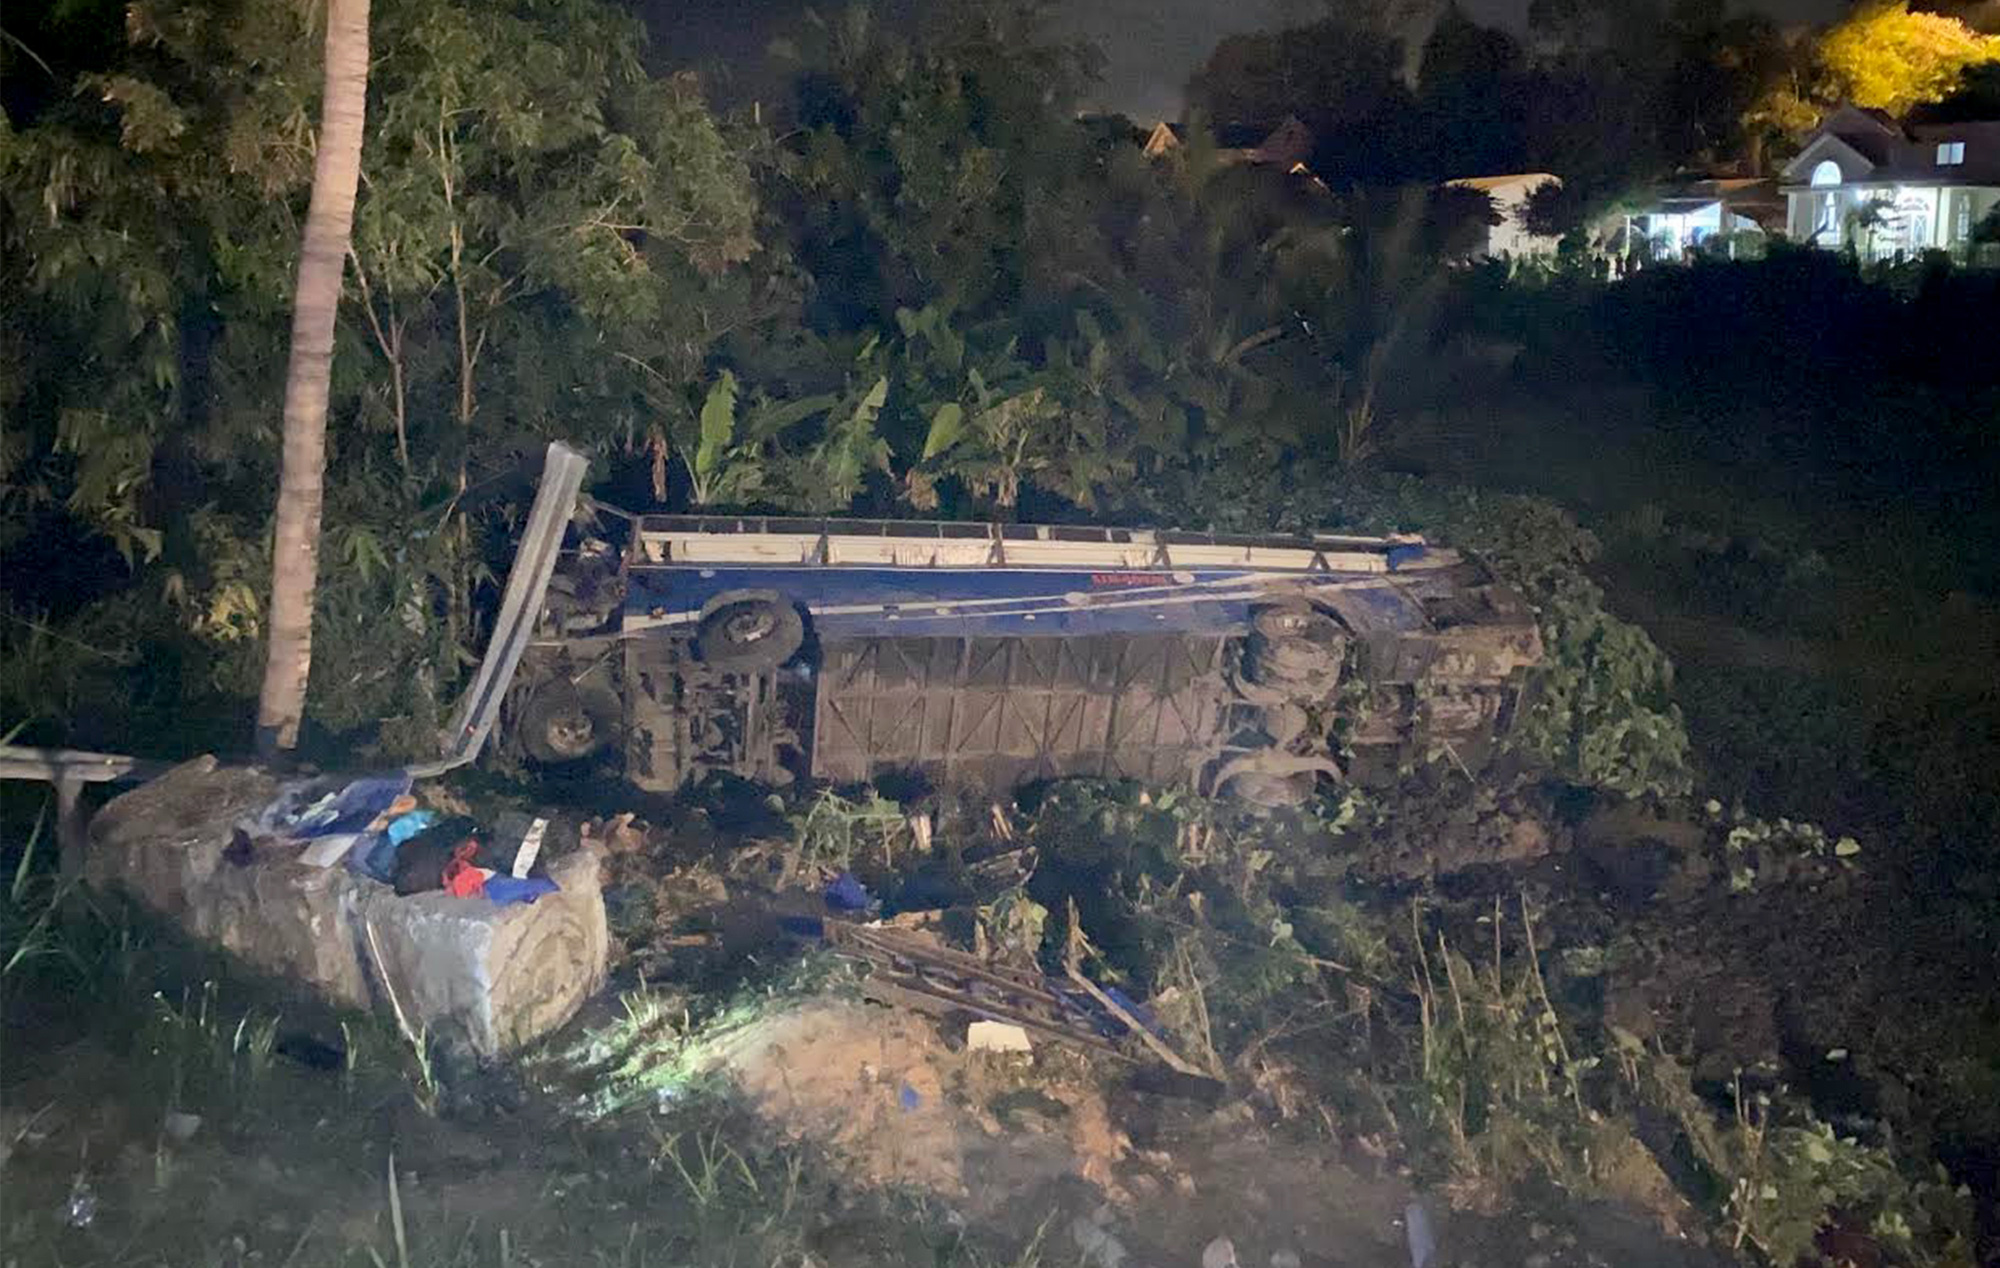 A passenger bus is on its side after it plunged into a roadside paddy field and toppled in Phu Yen Province, Vietnam on January 26, 2020. Photo: Pham Thanh / Tuoi Tre